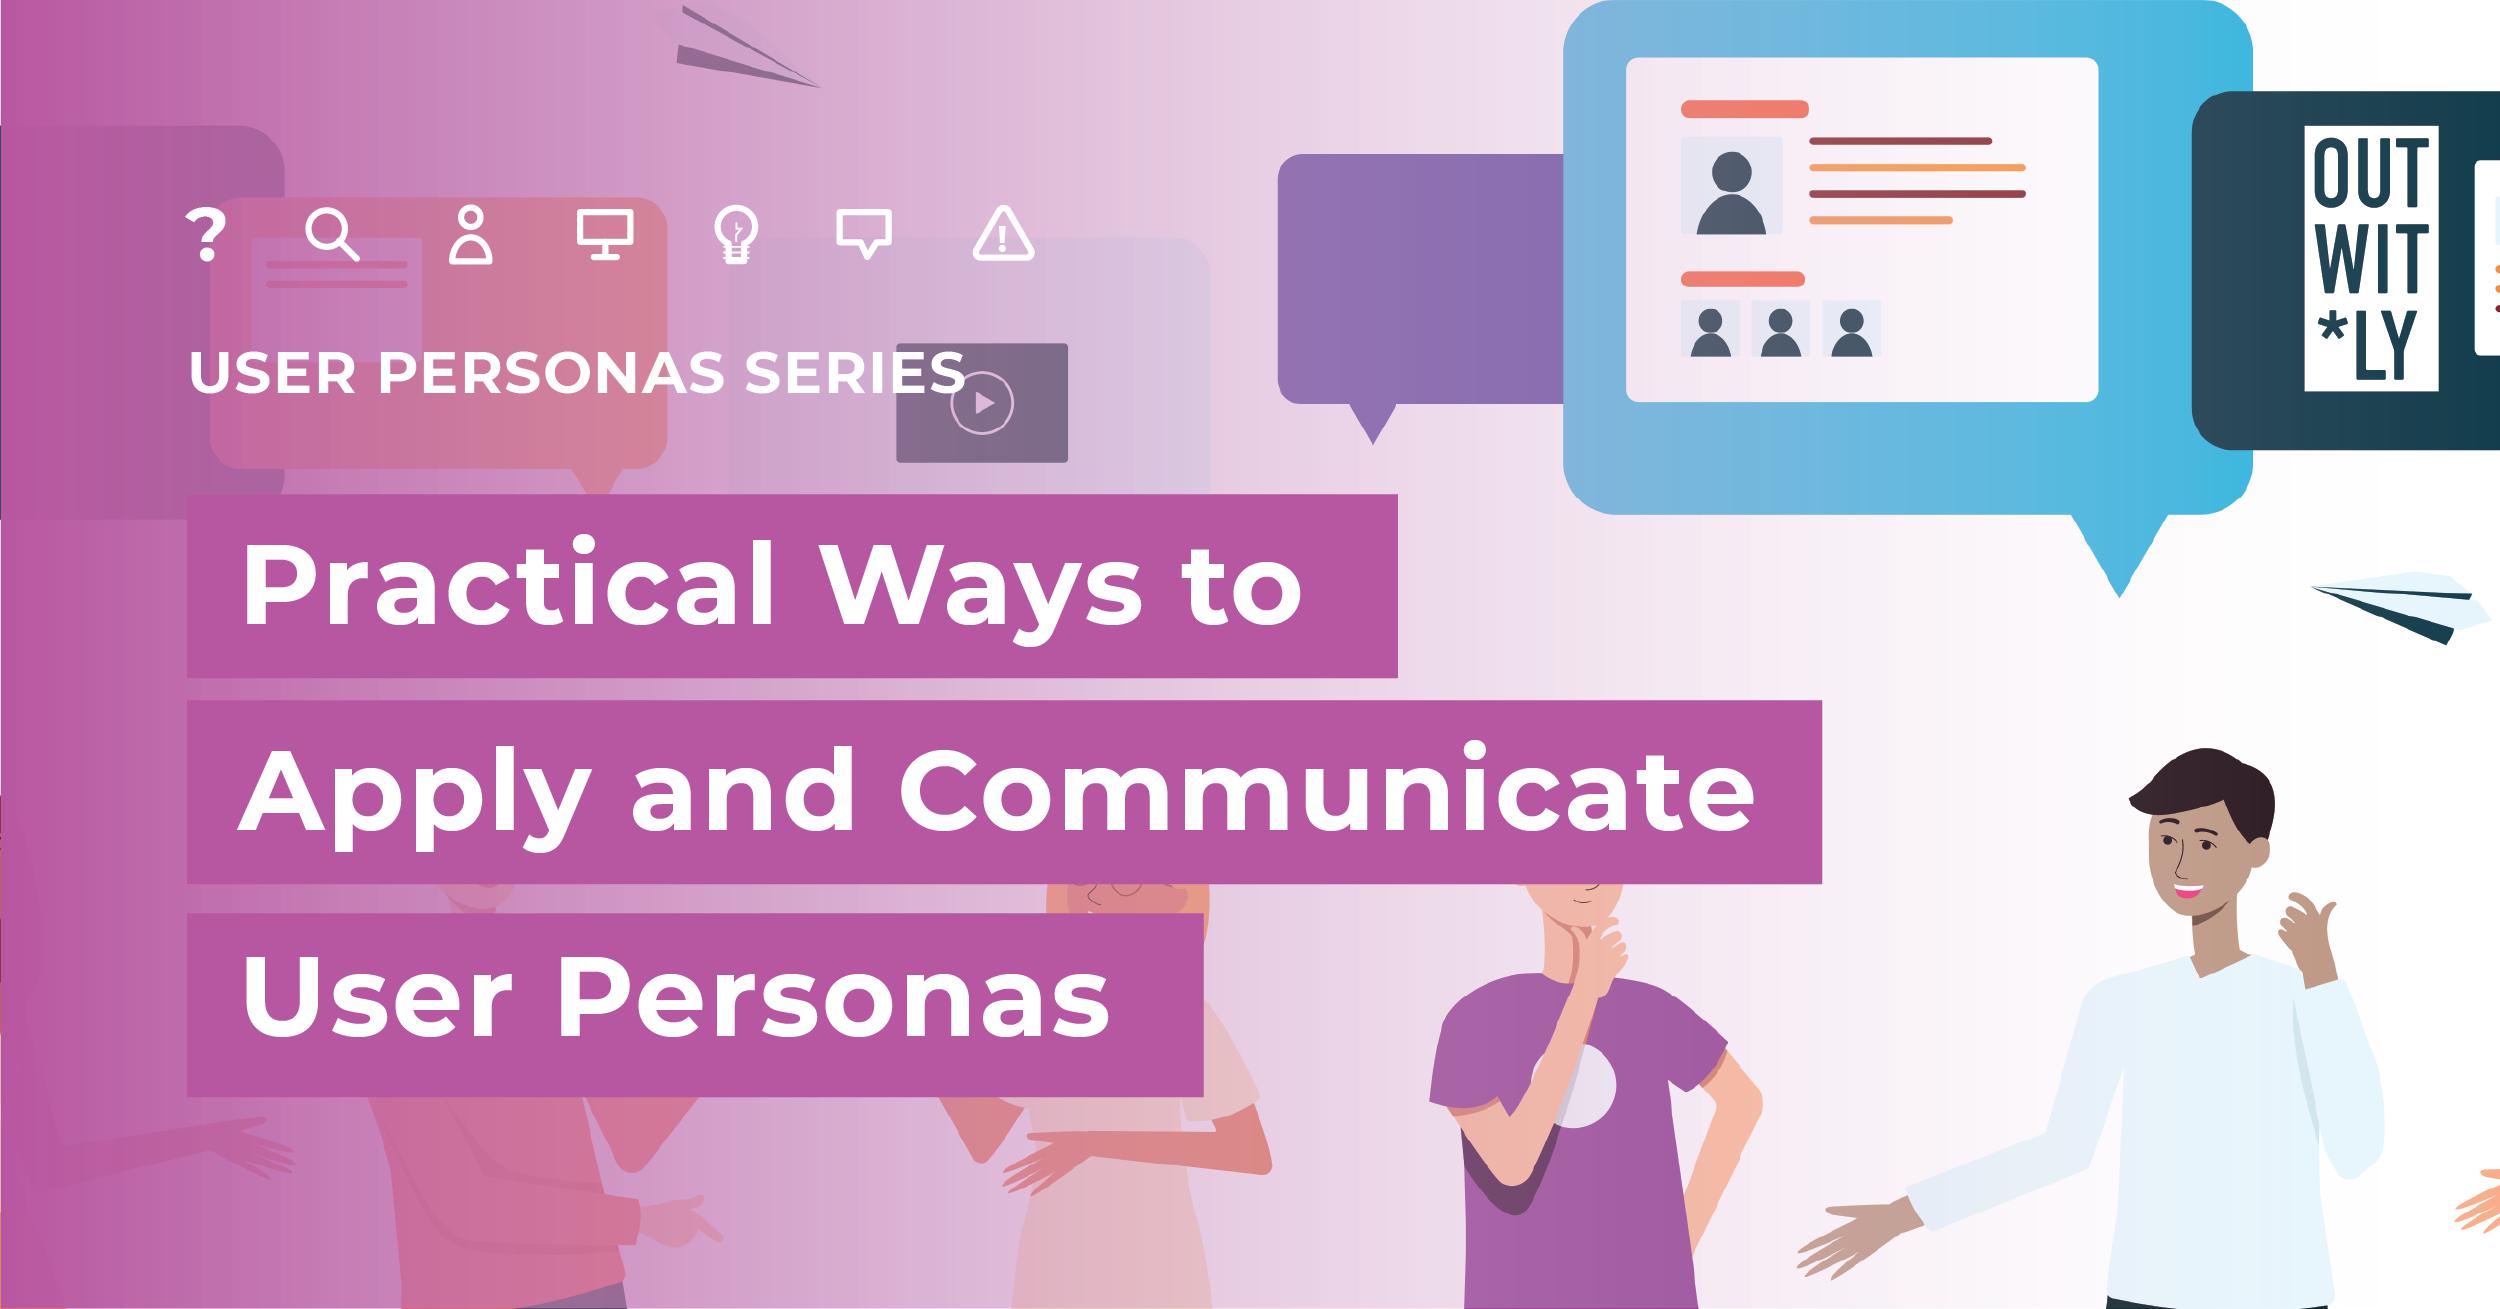 Practical Ways to Apply and Communicate User Personas at Work